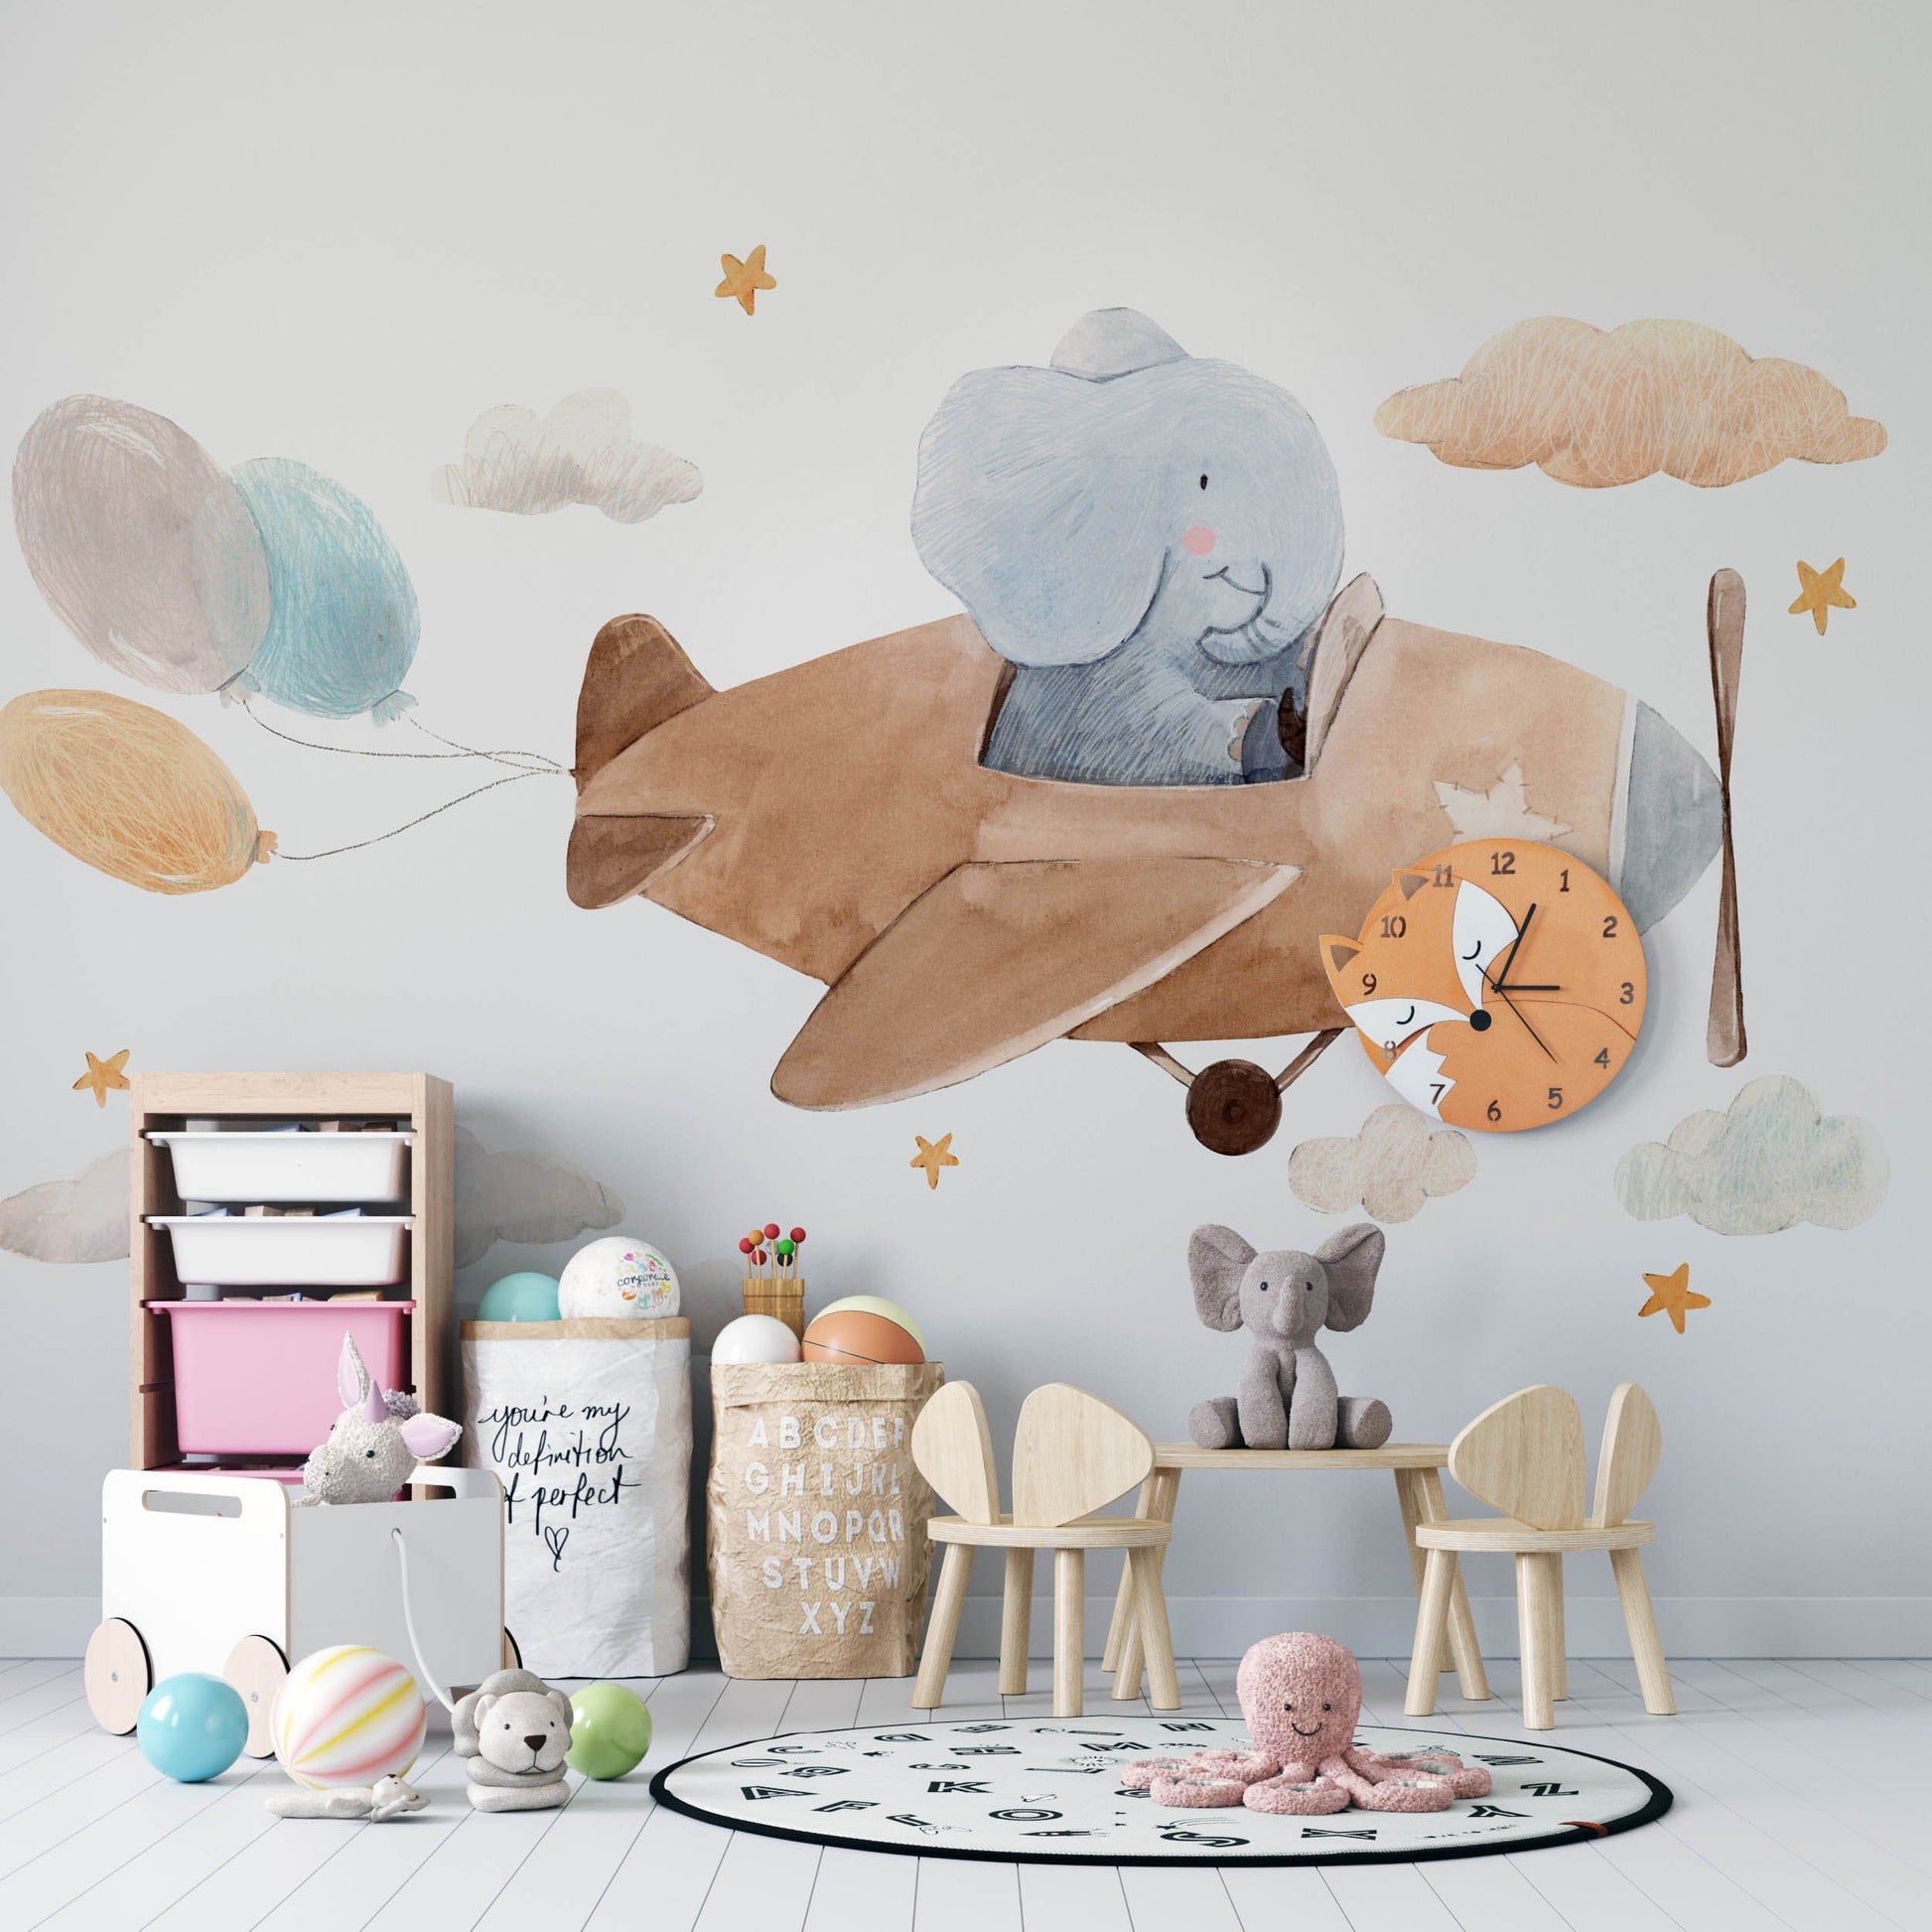 Wallpaper mural featuring an elephant flying a plane for a child's room.